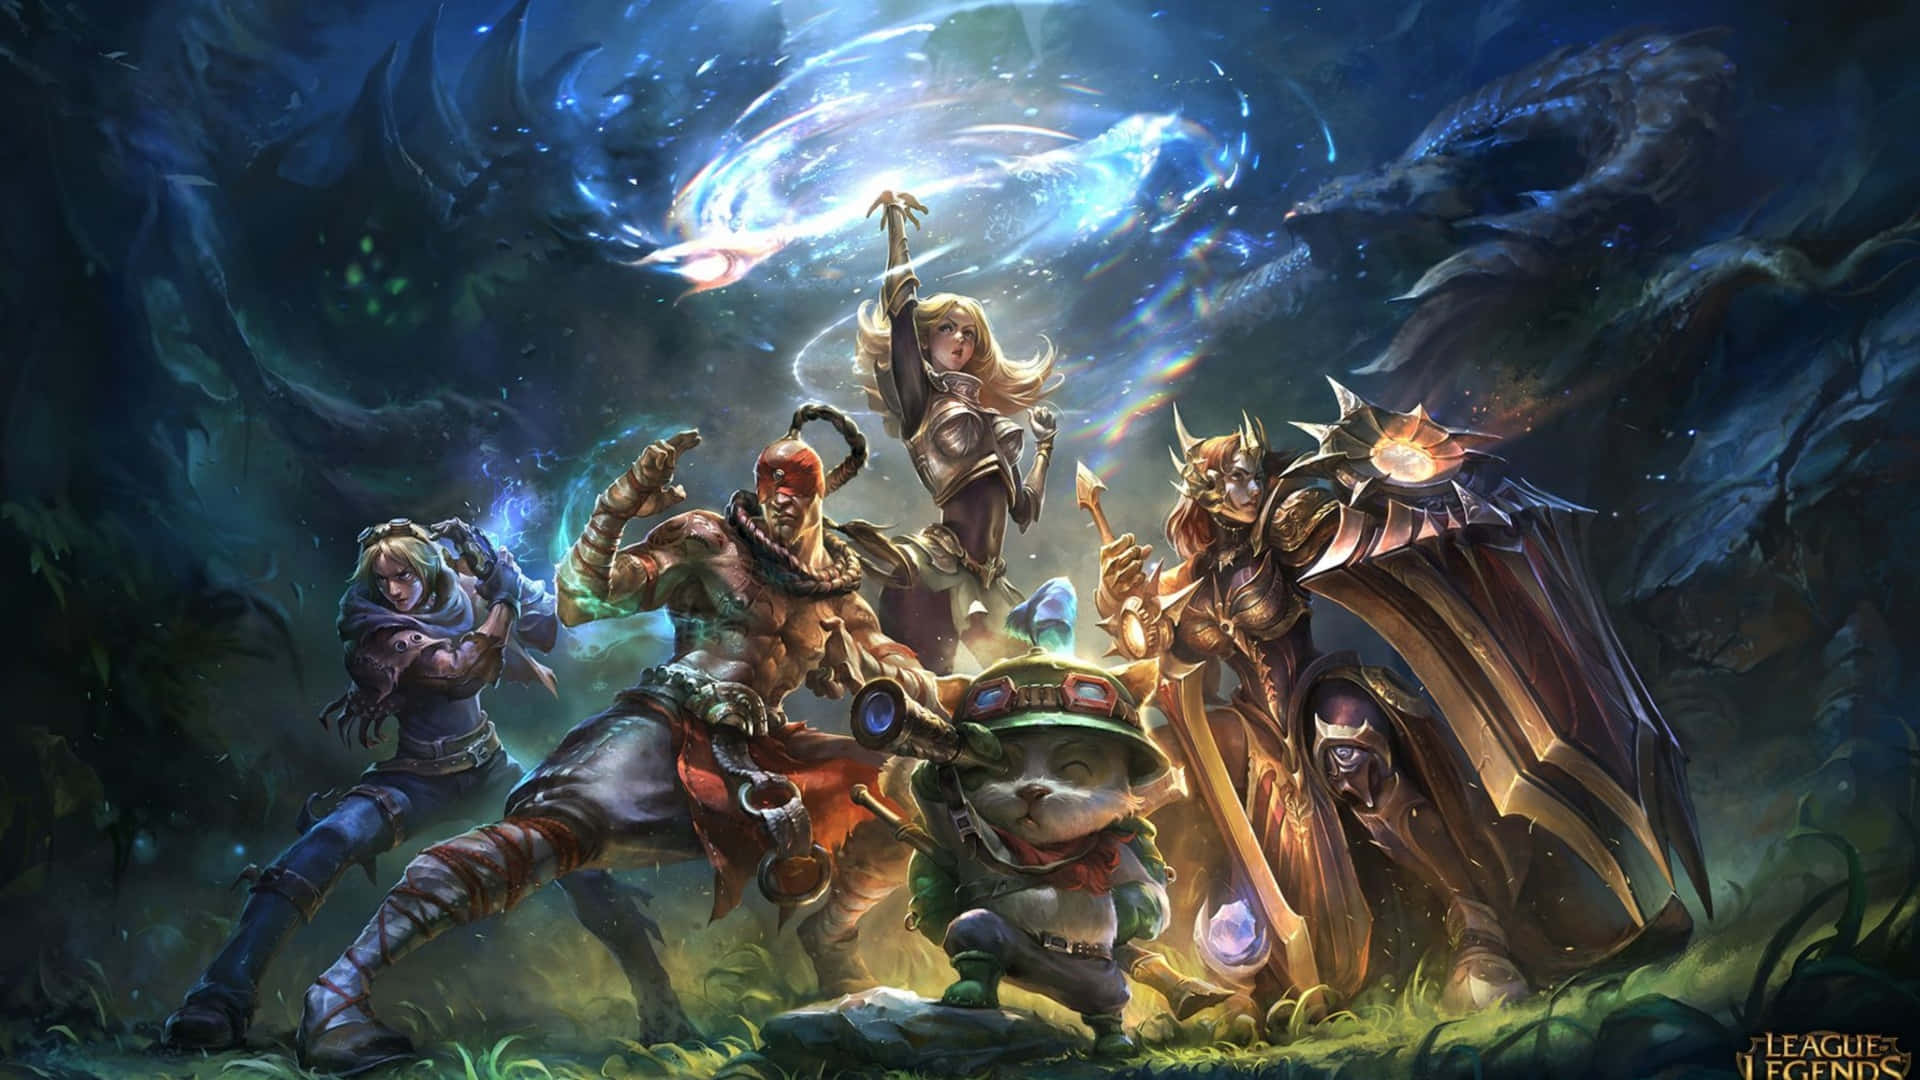 TAKE THE THRONE - Warring factions in the mythical game world of League Of Legends.